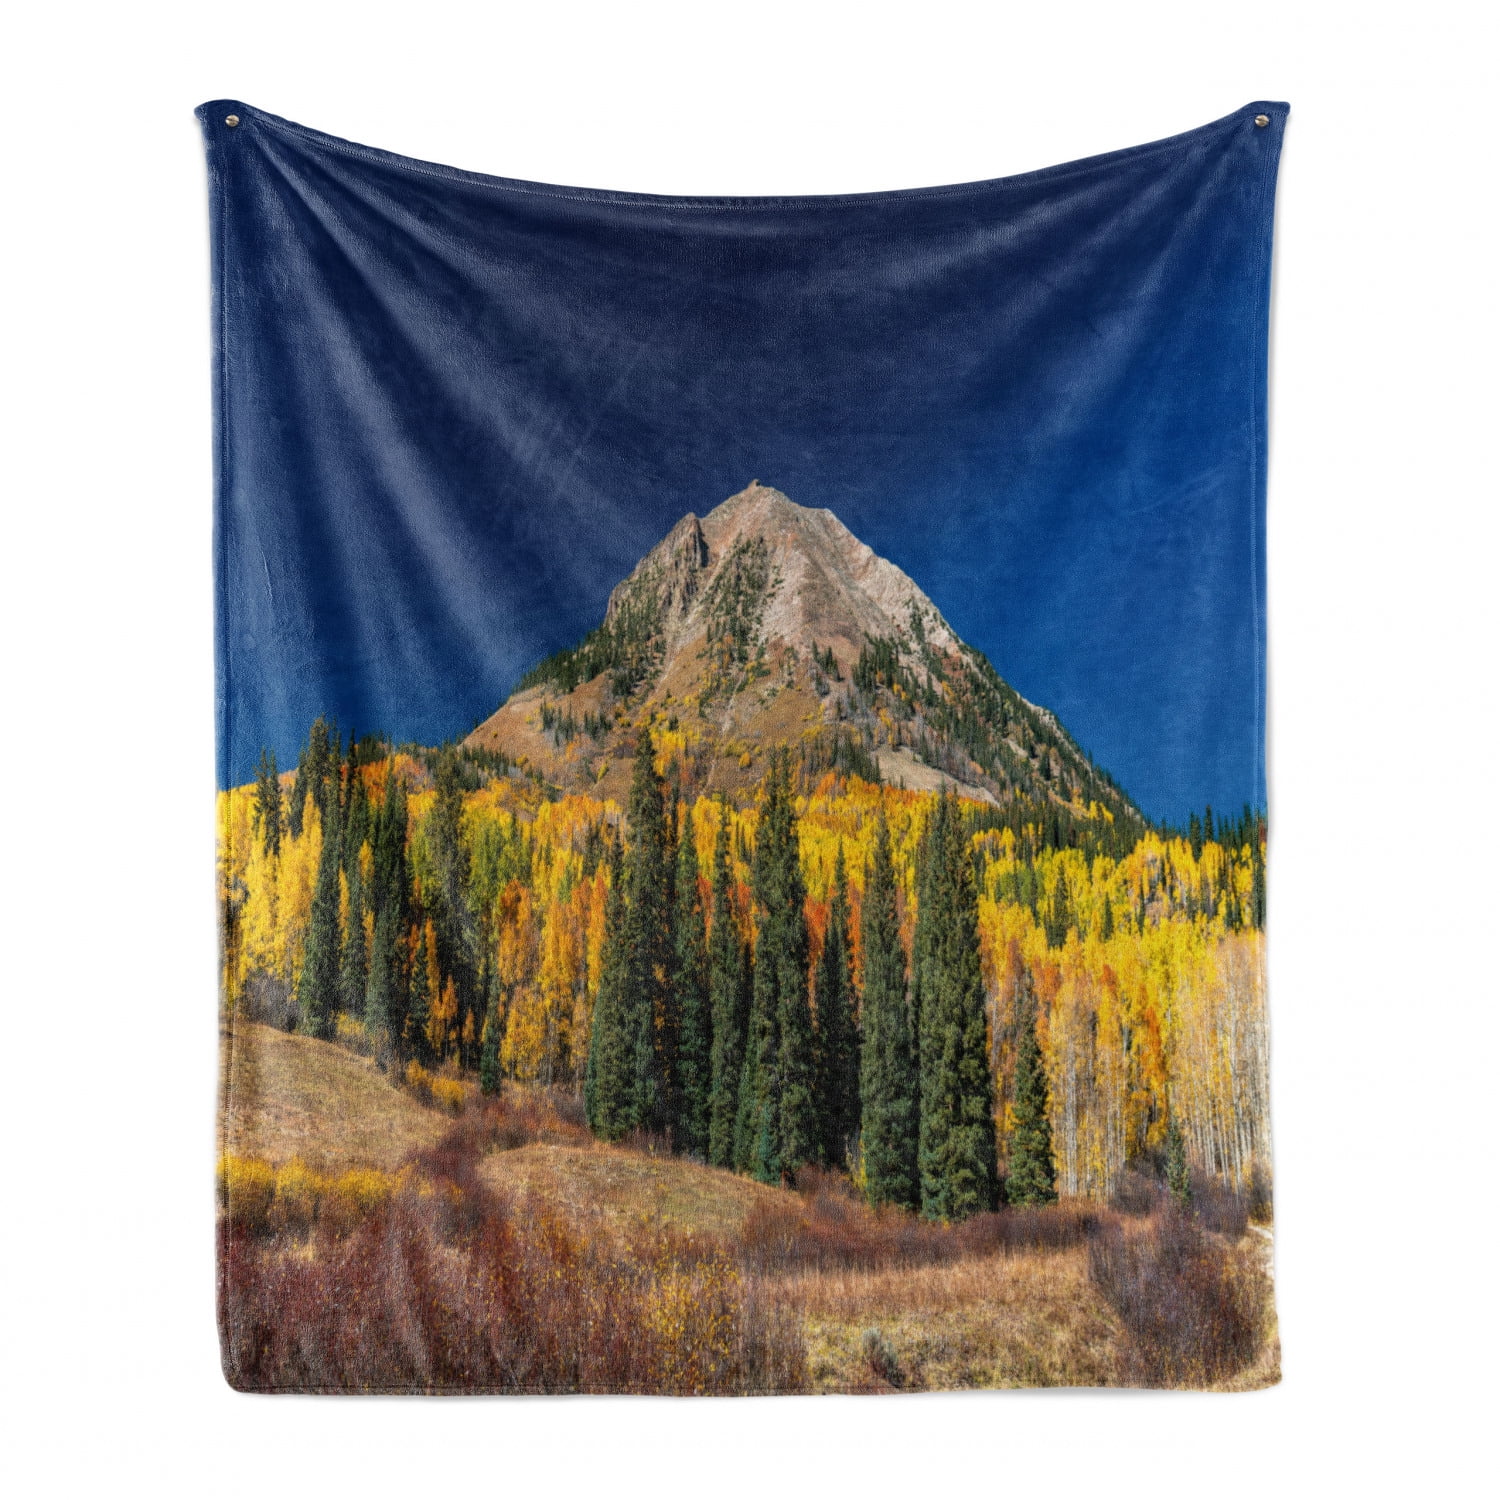 Not Applicable Art Picture Blanket Super Soft Luxurious Warm 50 60CM